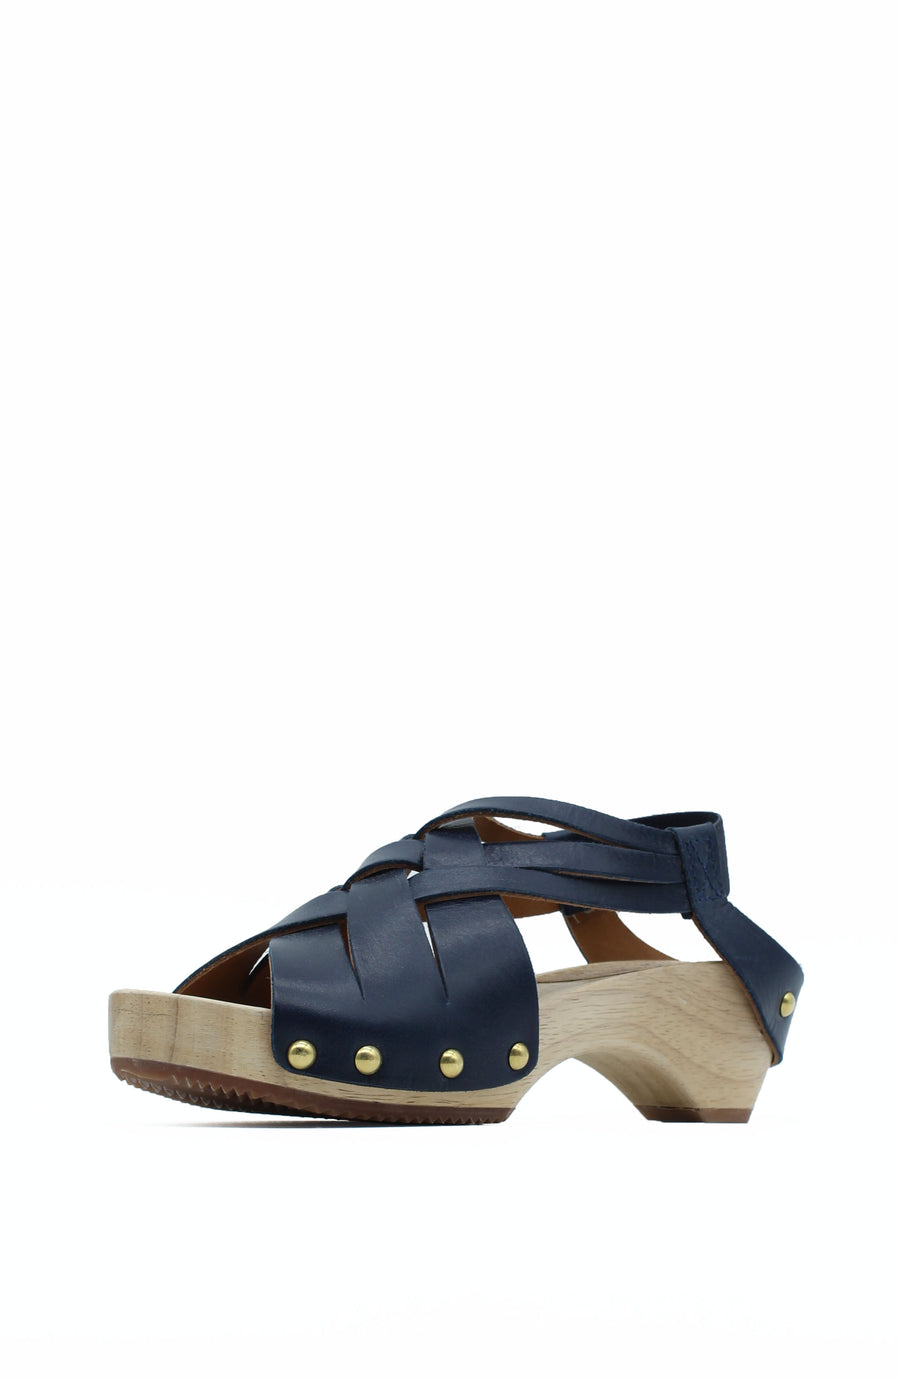 CLEARANCE - JEWELL in NAVY